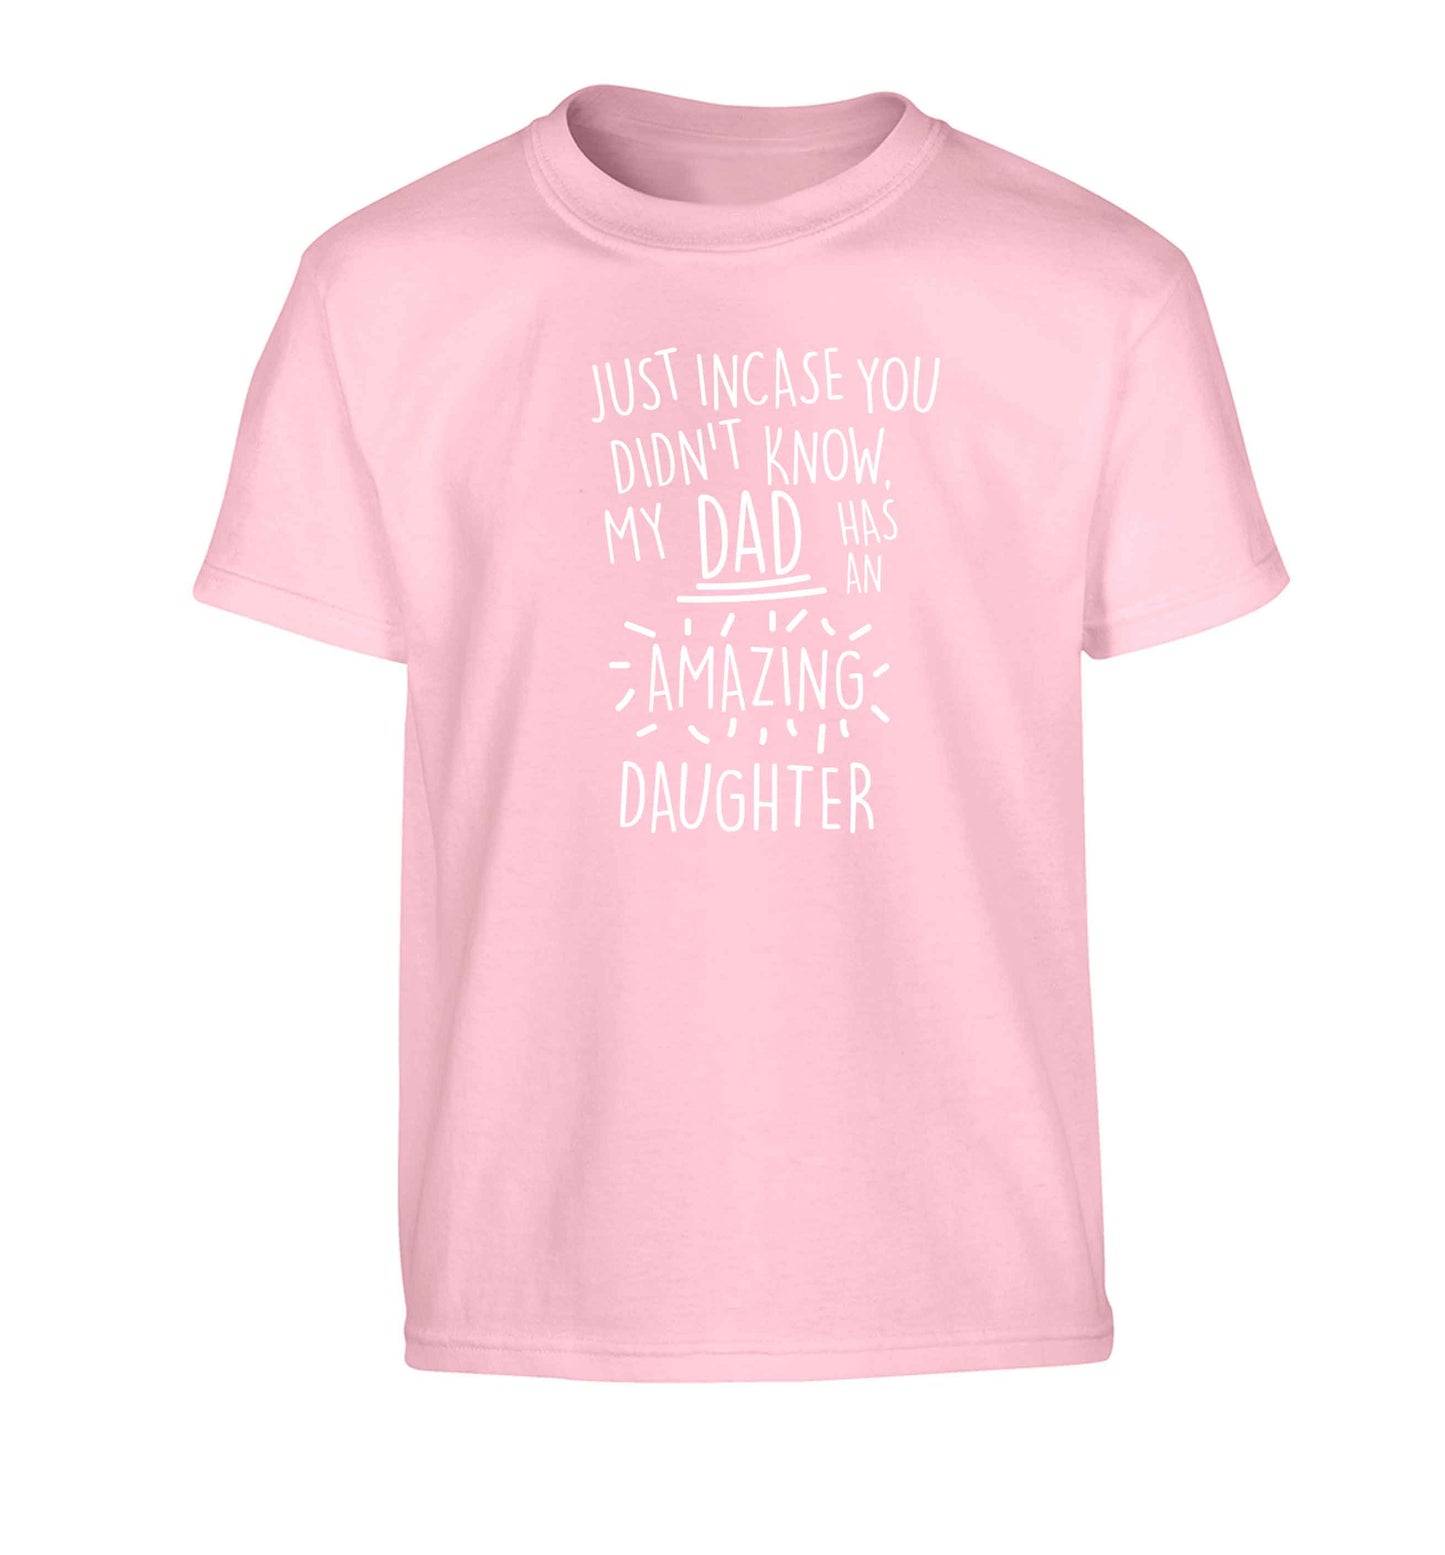 Just incase you didn't know my dad has an amazing daughter Children's light pink Tshirt 12-13 Years